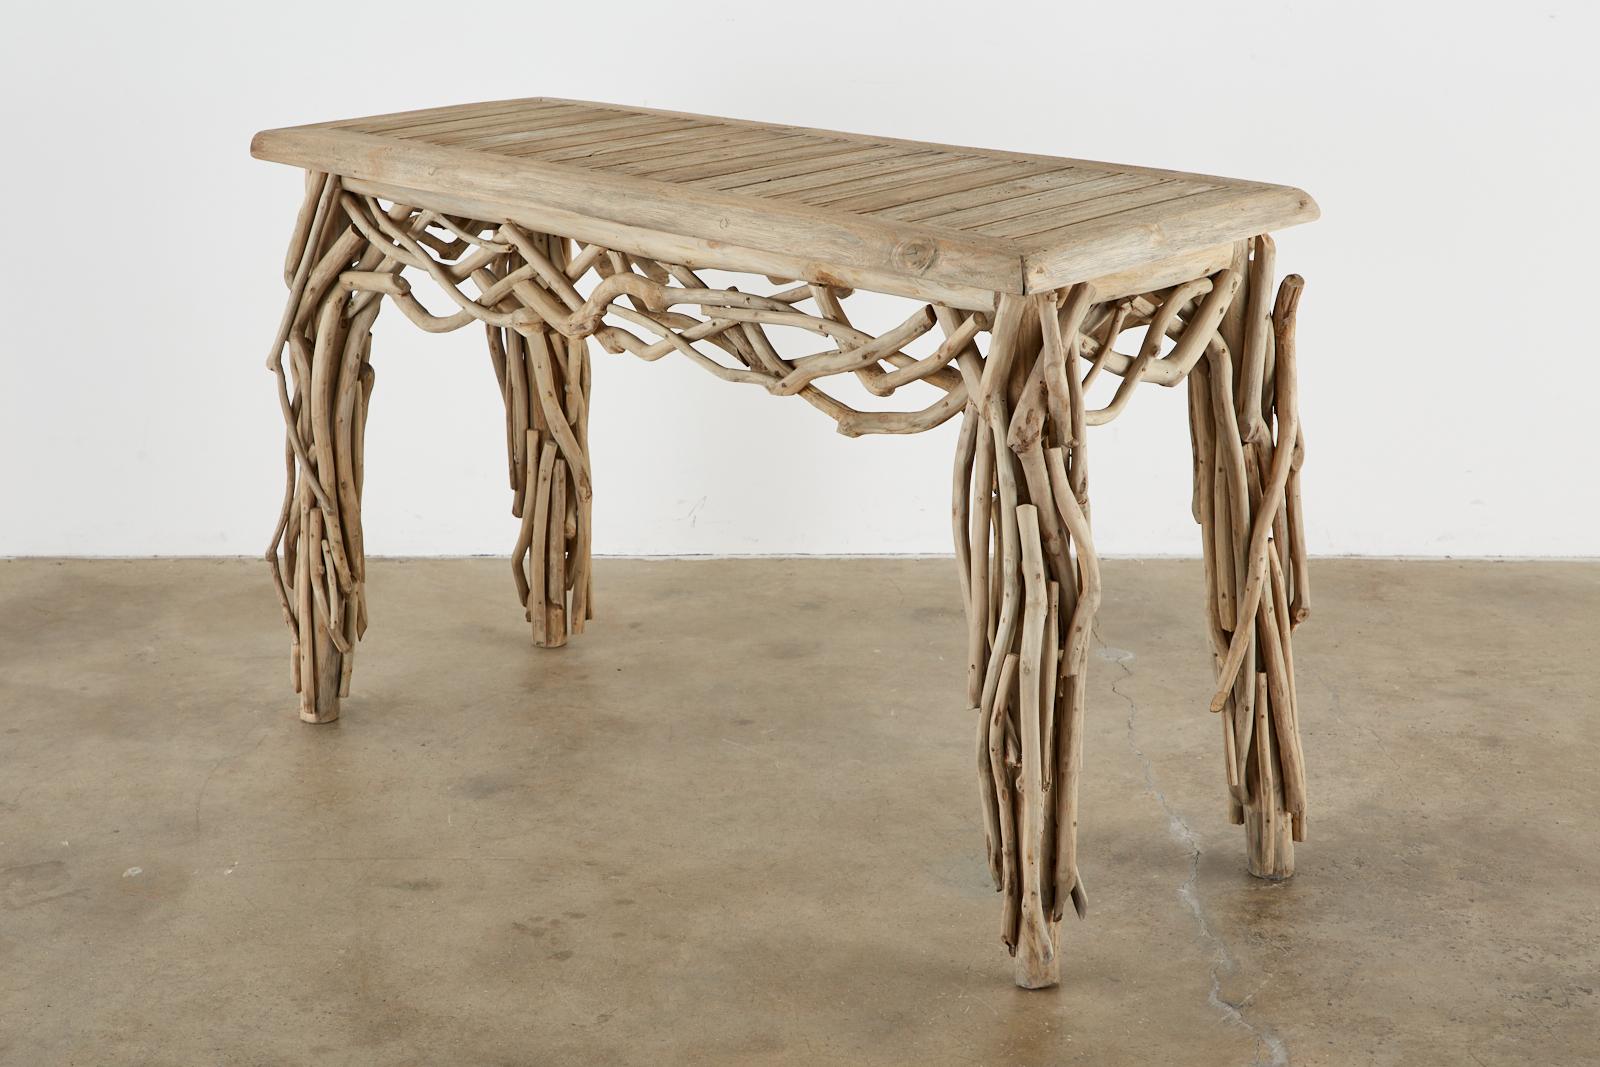 California coastal driftwood branch console table or sofa table made in the organic modern style. Constructed from a bleached teak wood frame with thick 2 inch planks and covered with beautifully weathered driftwood branches. Artison made with